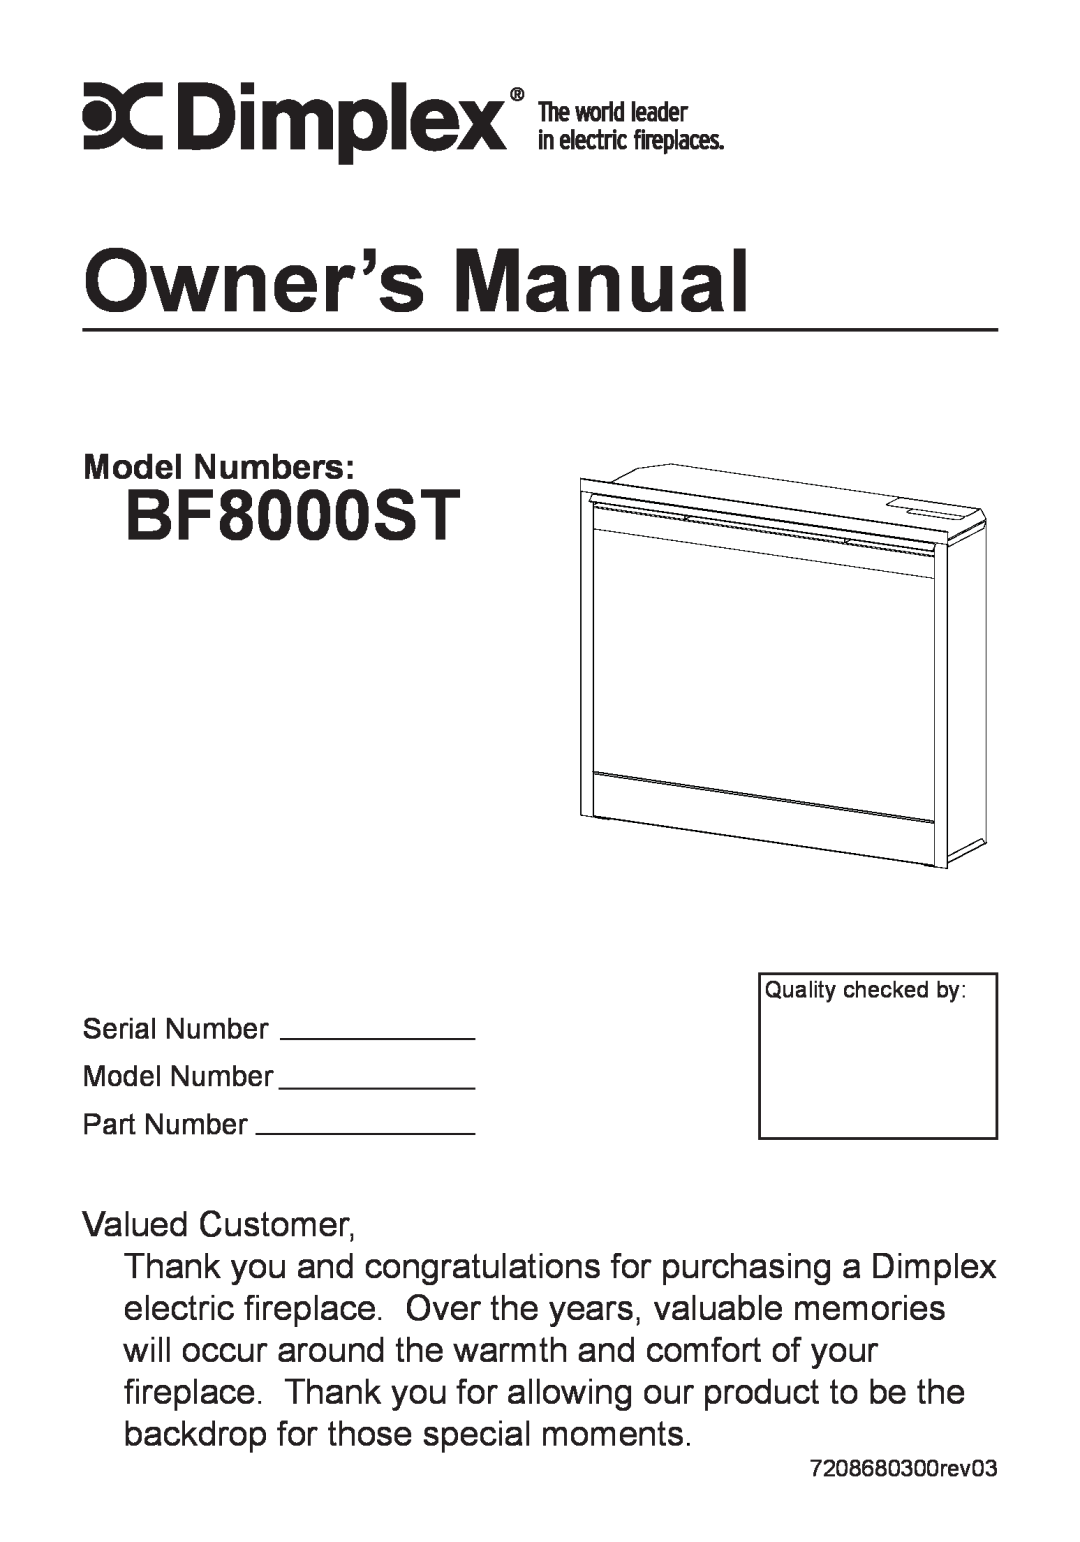 Dimplex BF8000ST owner manual Model Numbers, Valued Customer 